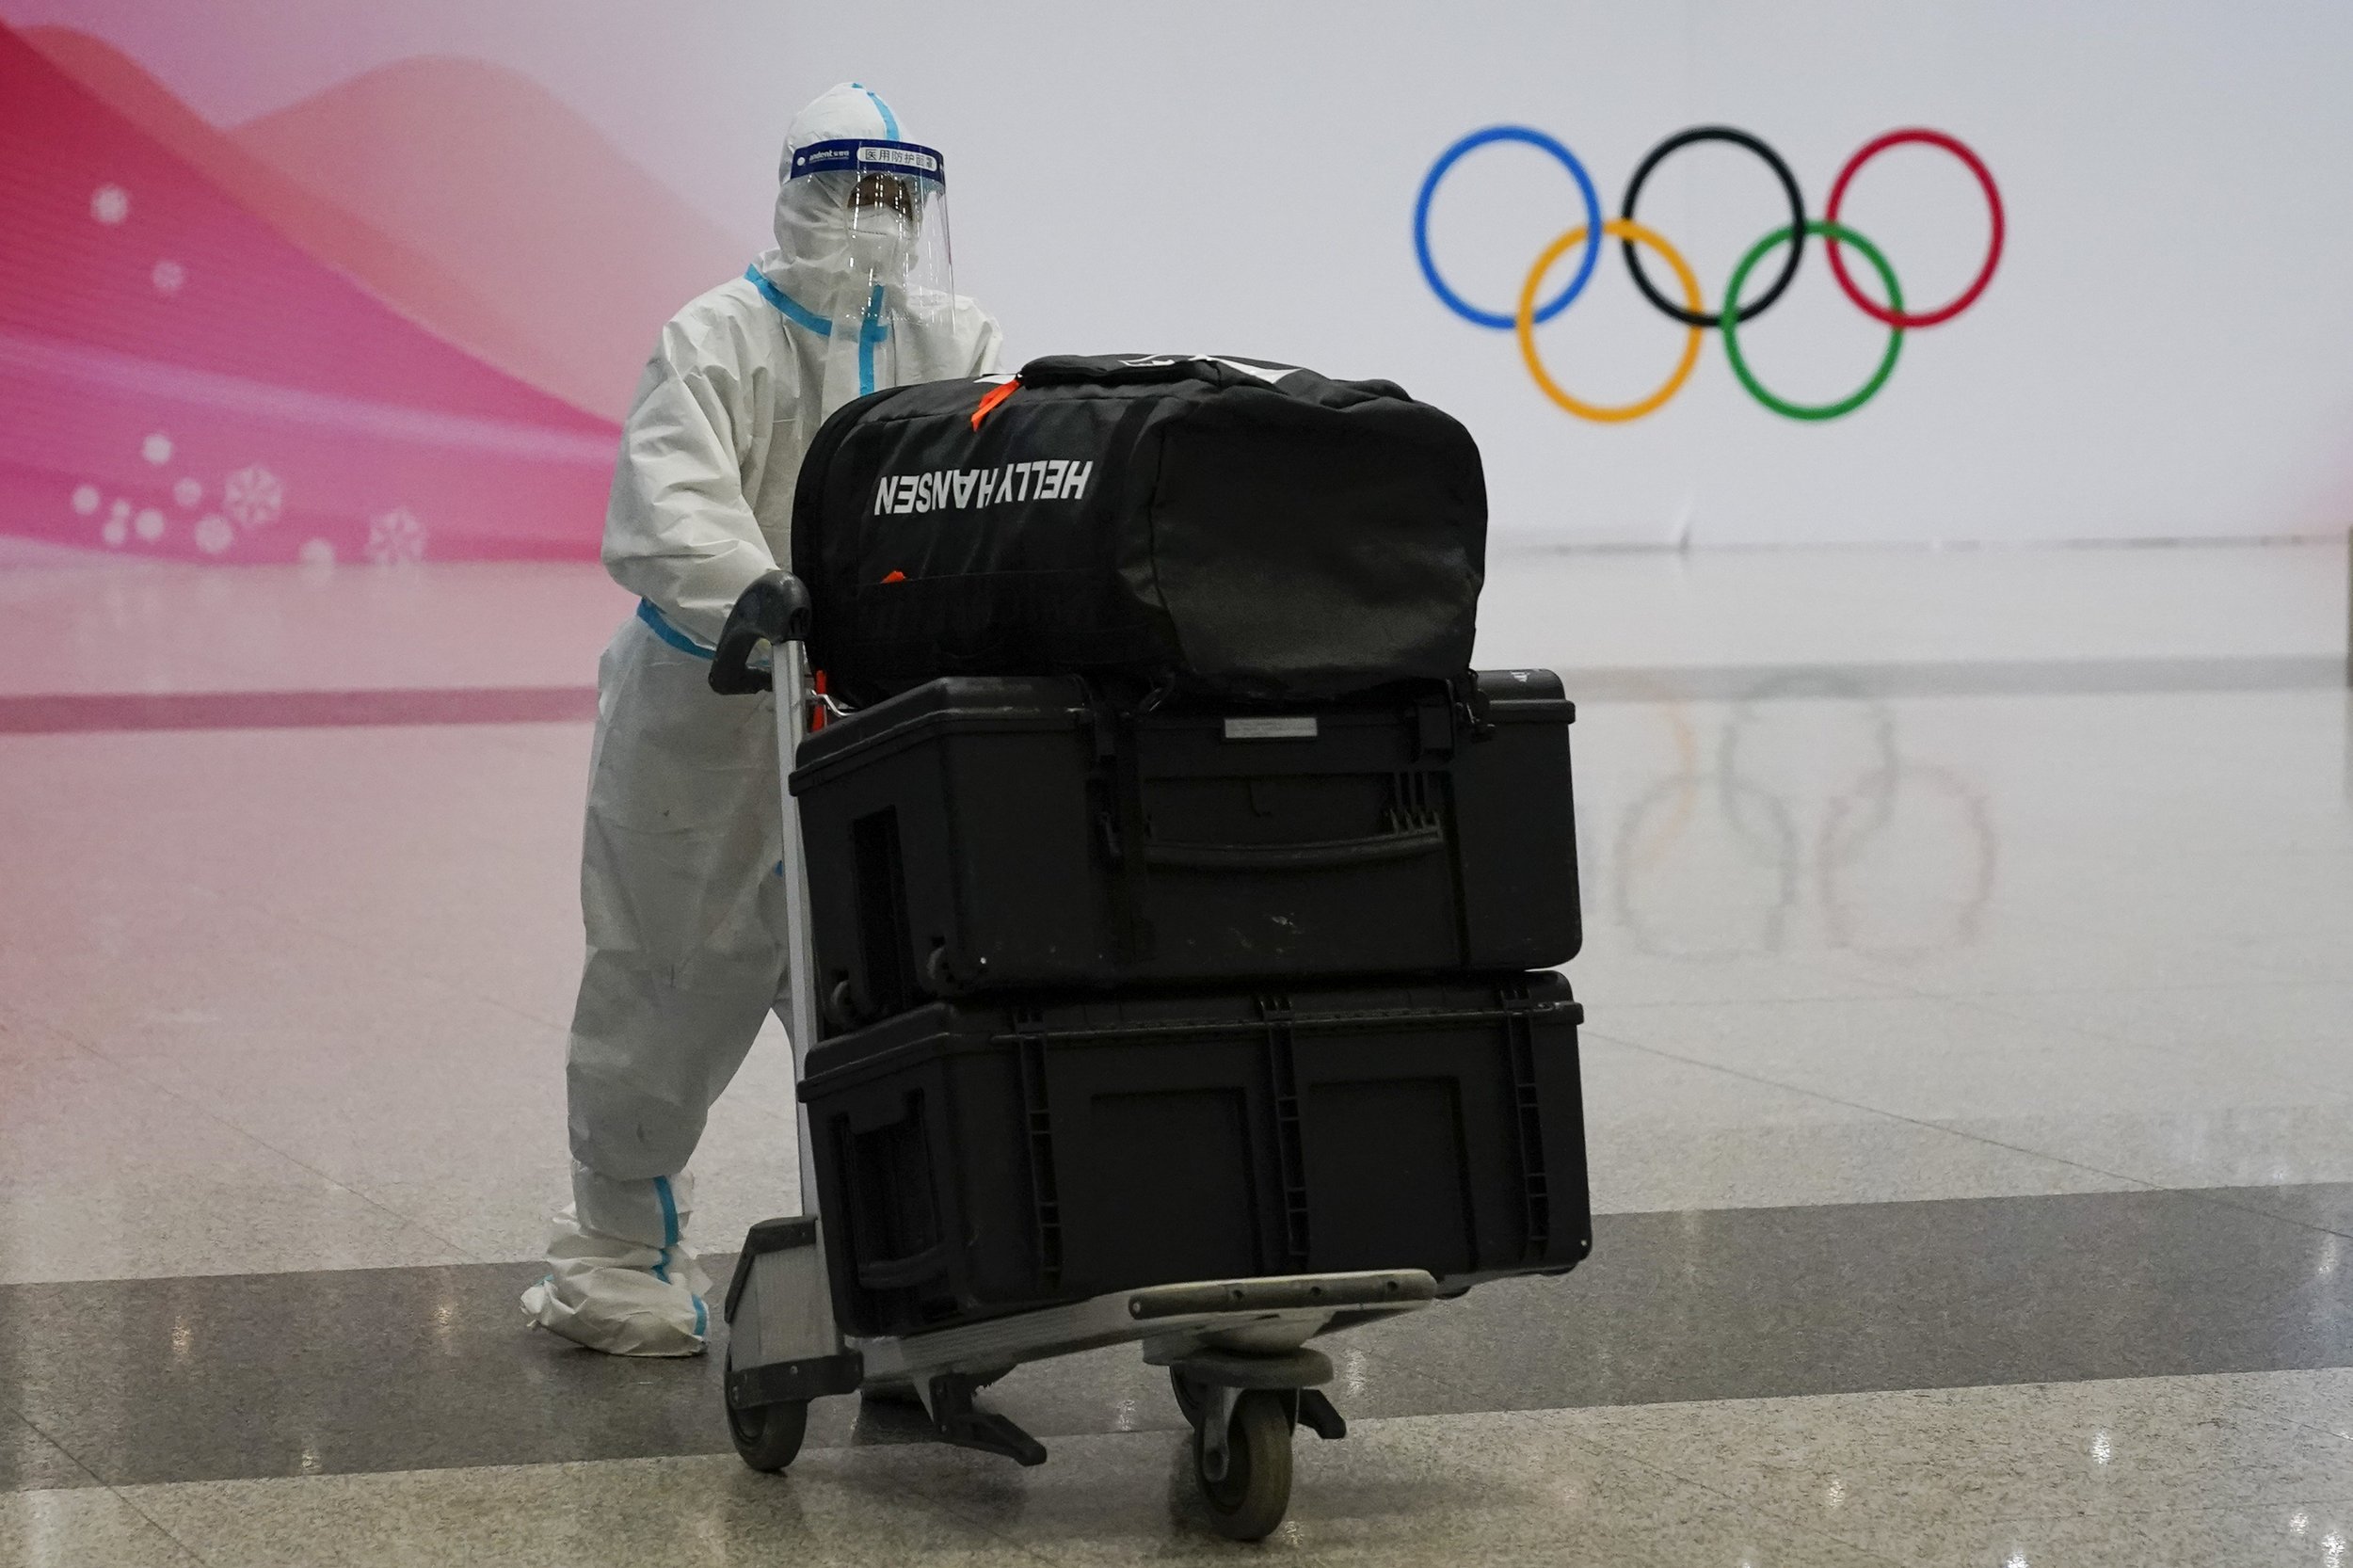  A volunteer moves a passenger's baggage at Beijing Capital International Airport after the conclusion of the 2022 Winter Olympics, Sunday, Feb. 20, 2022, in Beijing. (AP Photo/Ashley Landis) 